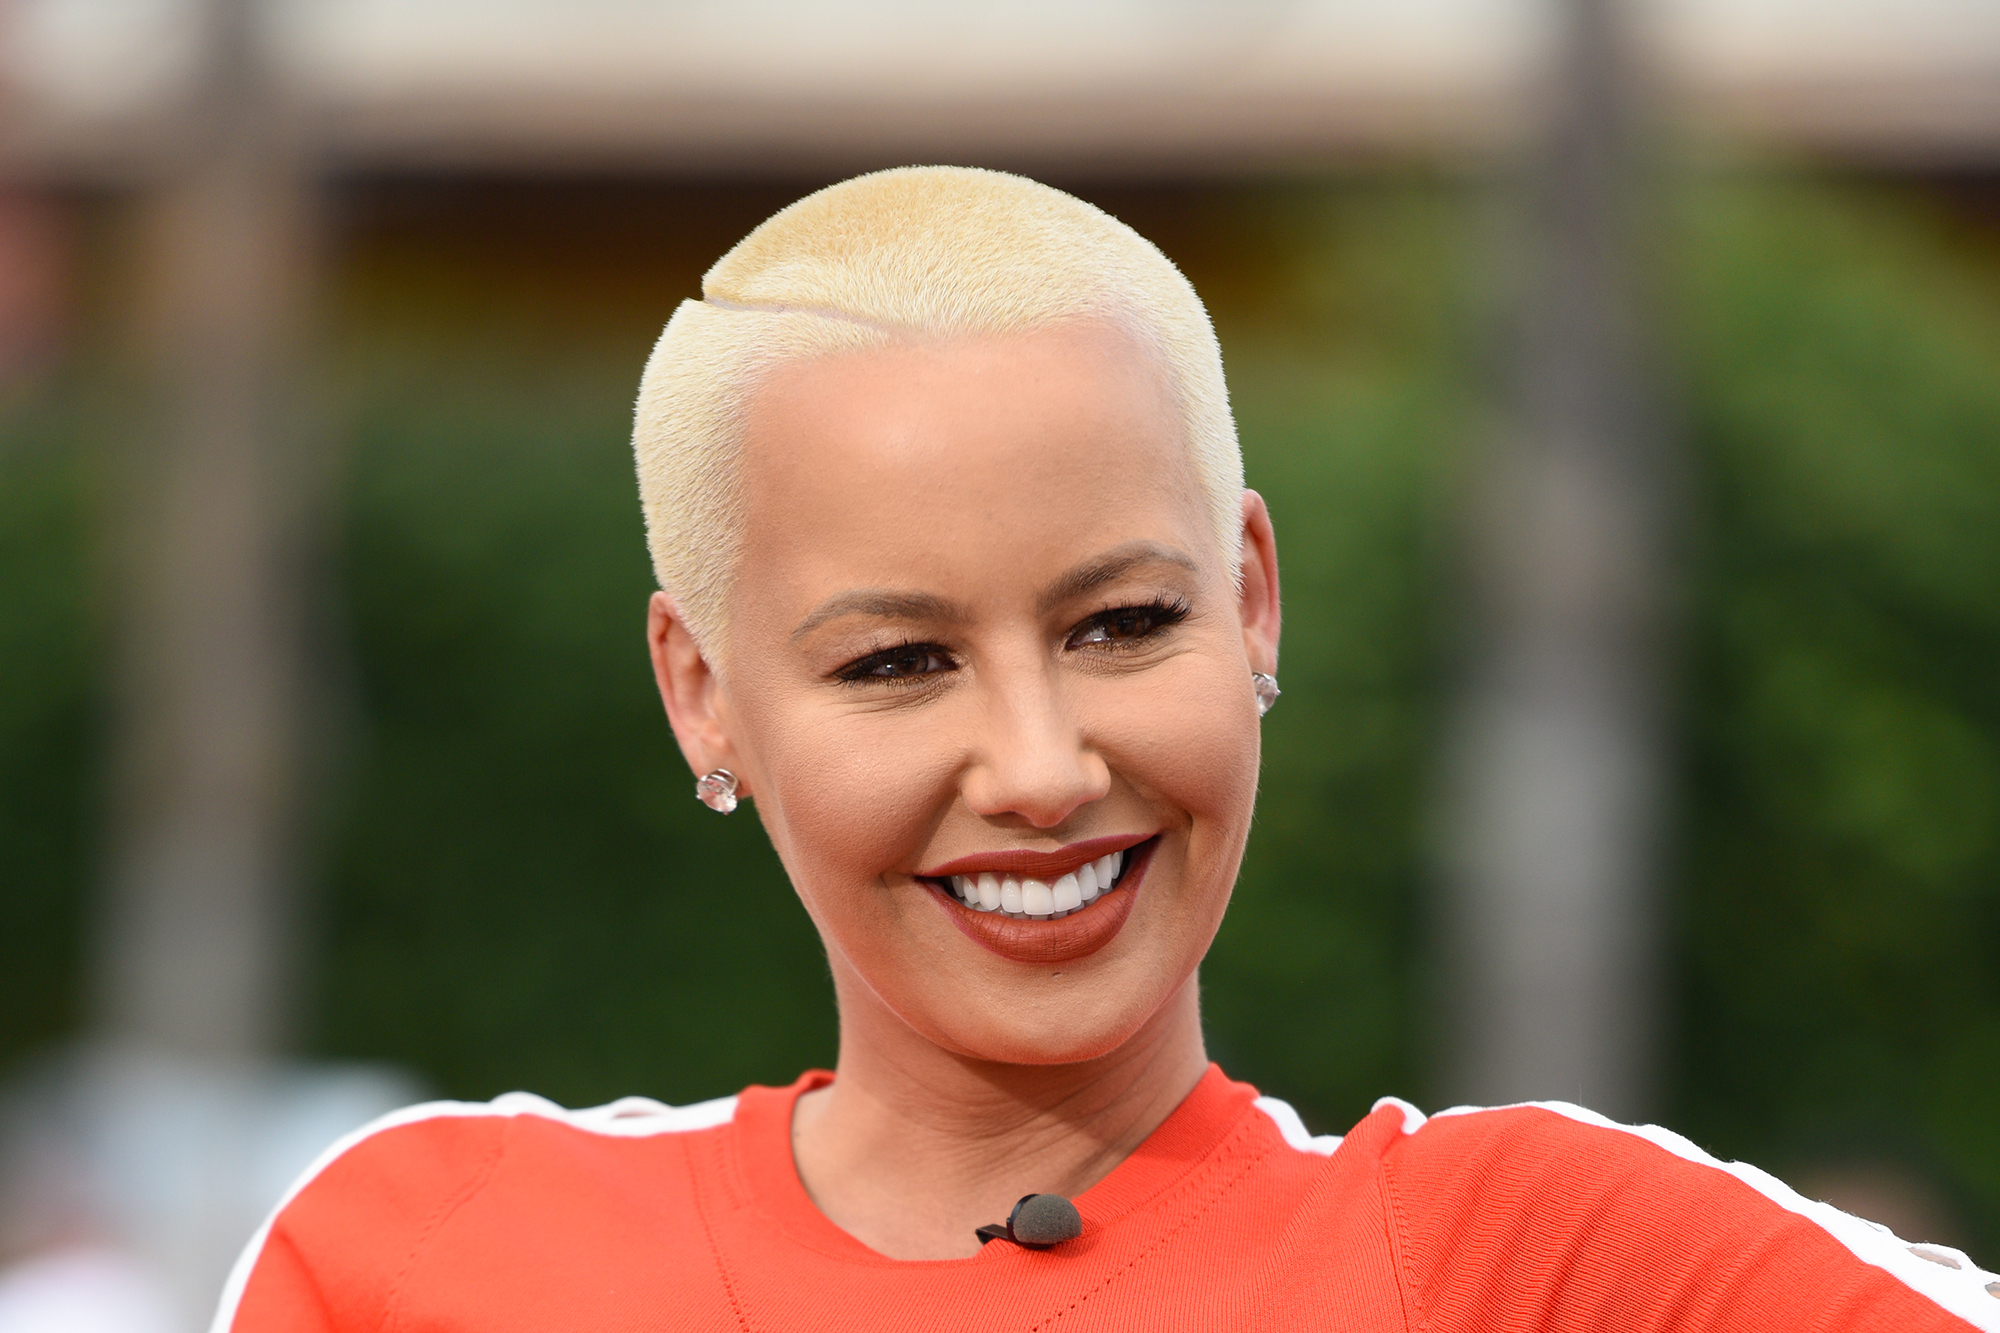 Amber Rose On "Extra"